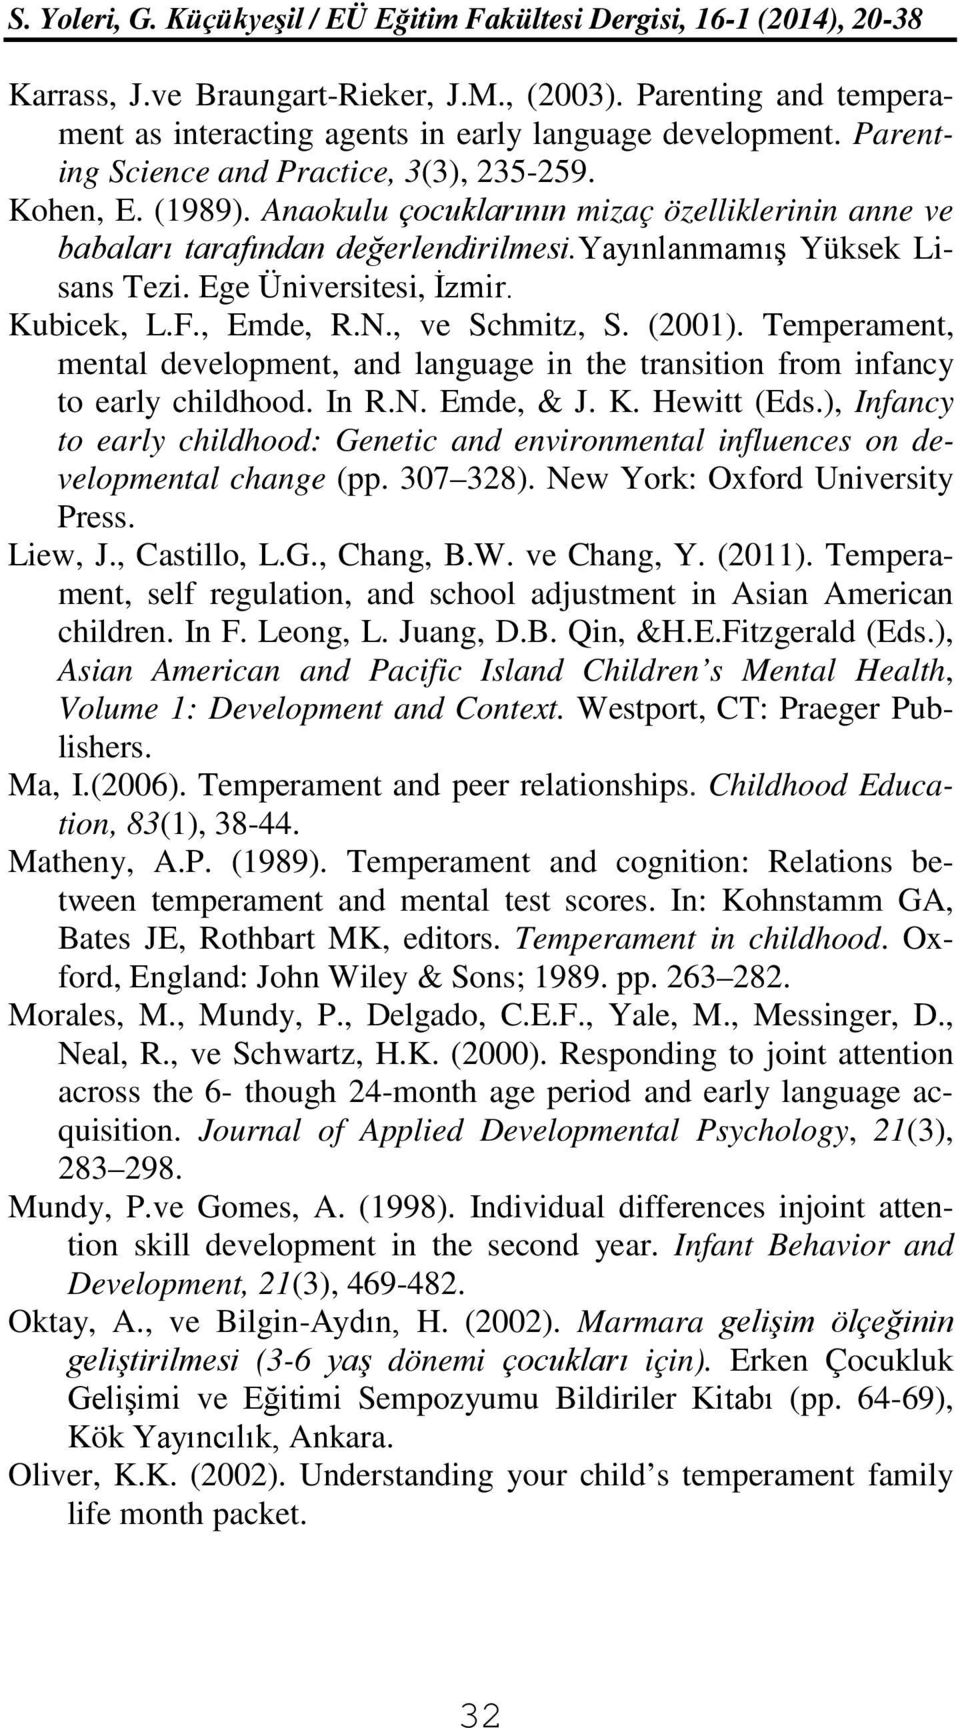 Temperament, mental development, and language in the transition from infancy to early childhood. In R.N. Emde, & J. K. Hewitt (Eds.